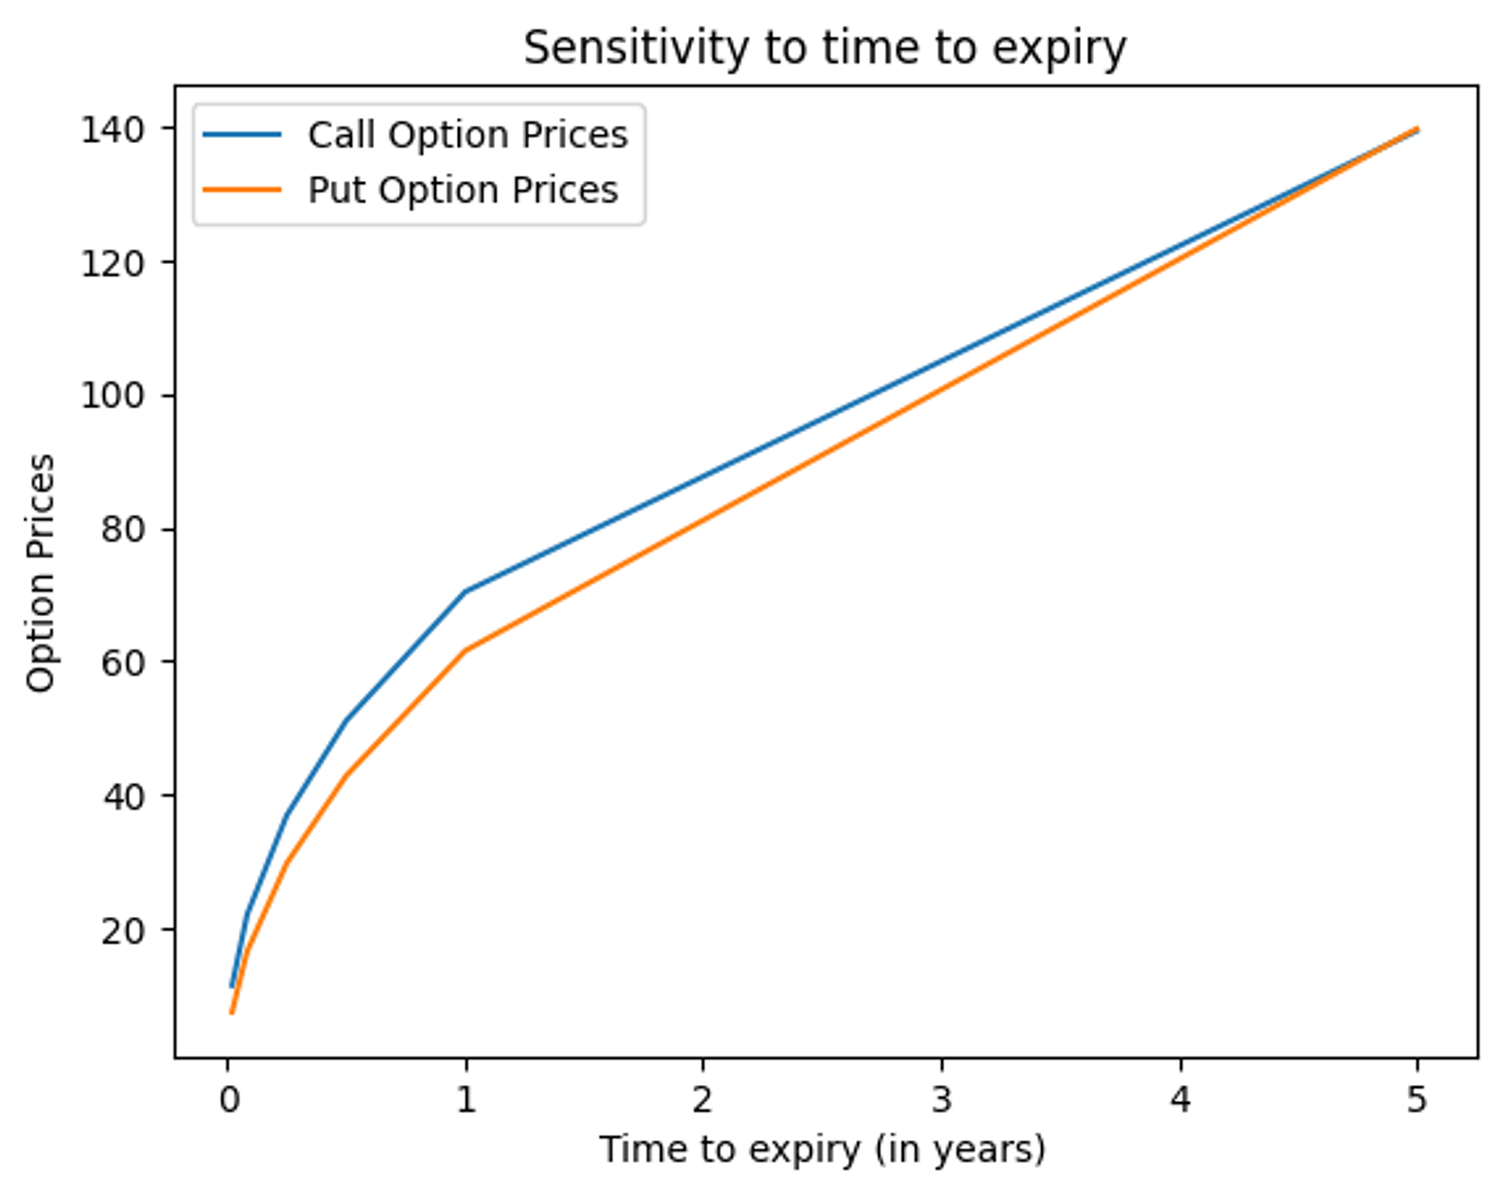 As time to expiry decreases, the value of the option also decreases due to fall in the time value of the option (time decay).